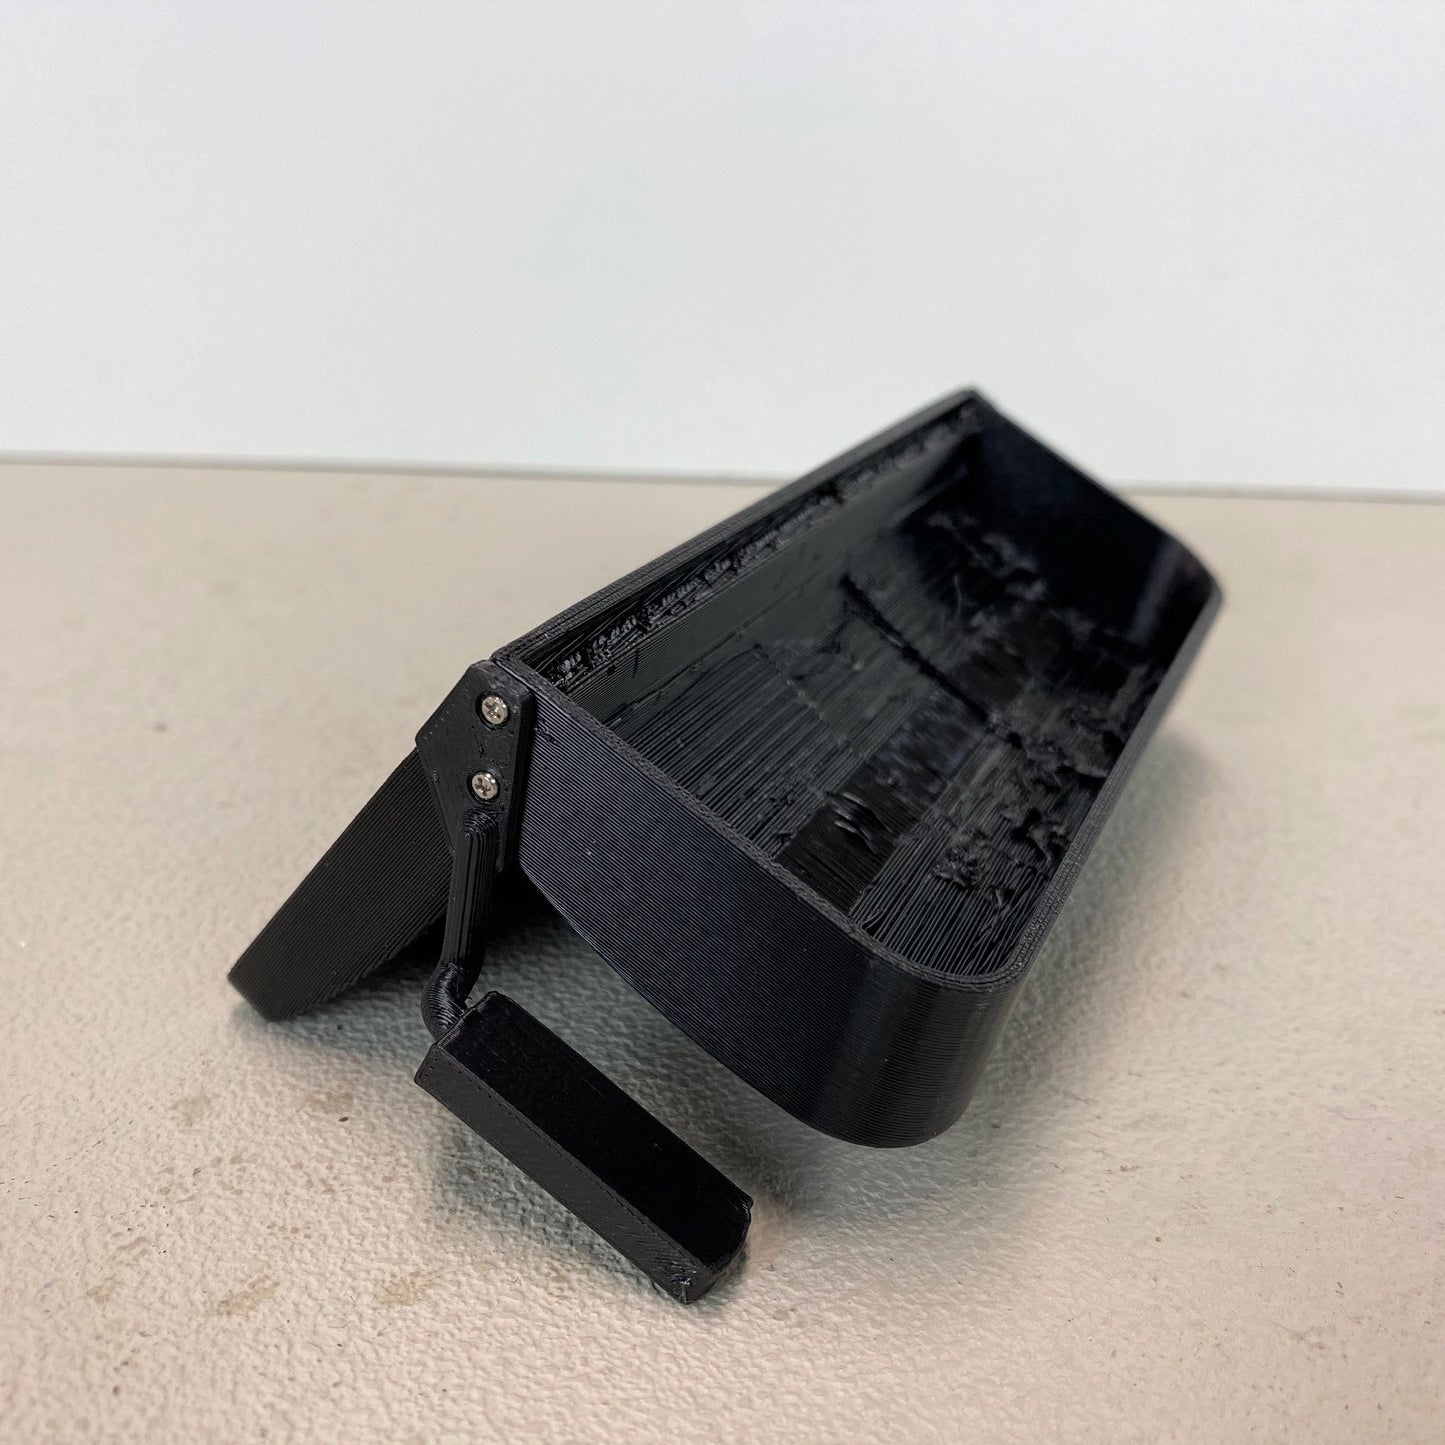 Rear Bench Seat for RC4WD Blazer